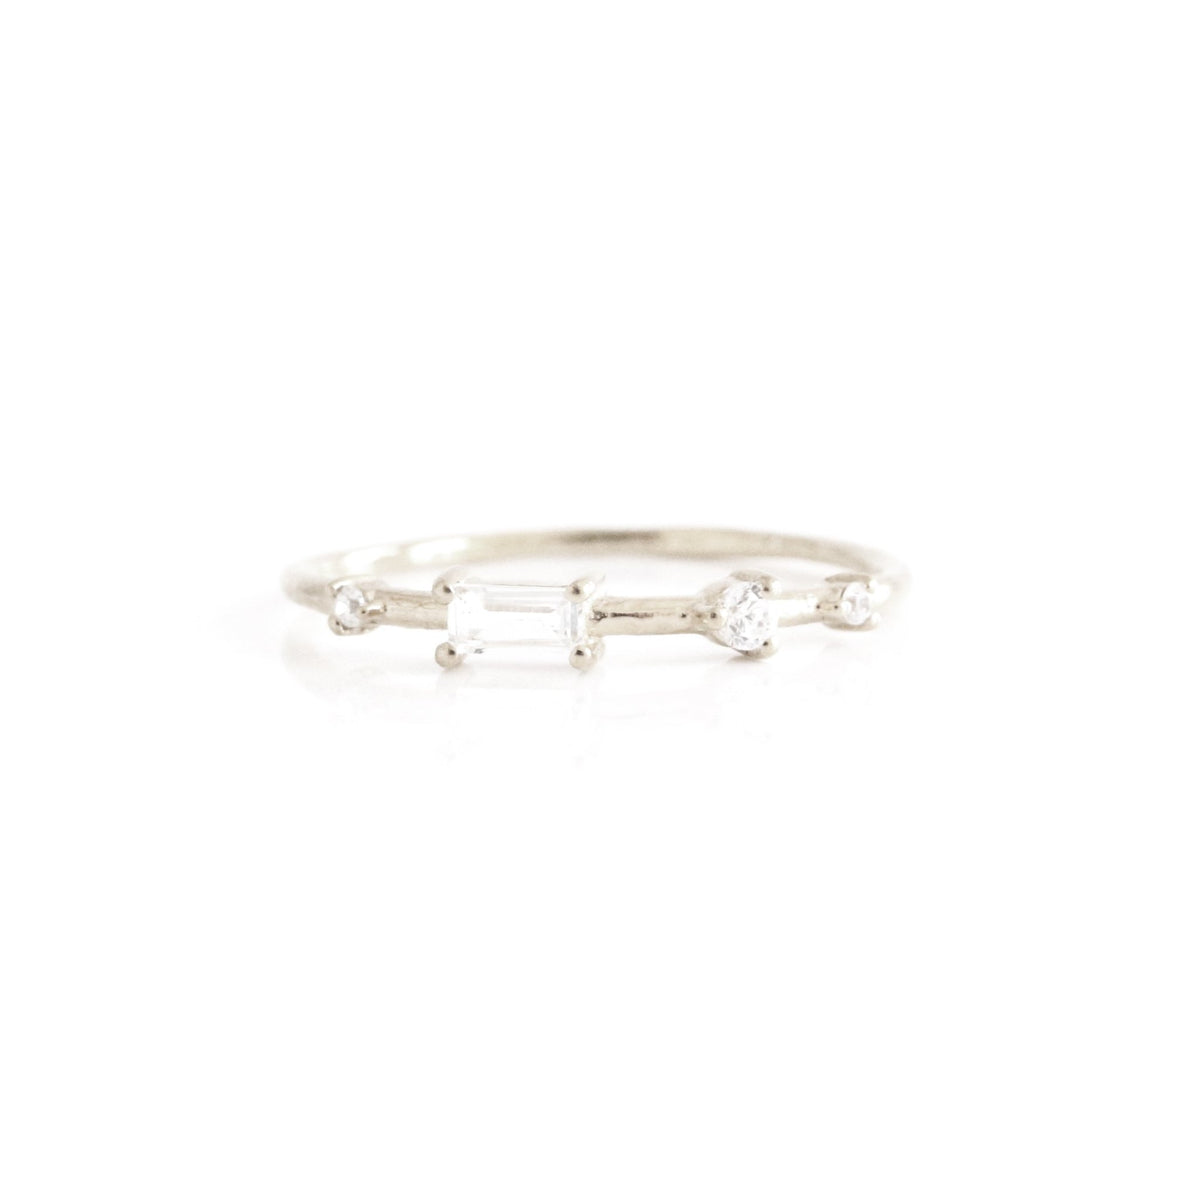 Loyal Dancing Stacking Ring - White Topaz, Cubic Zirconia &amp; Silver - SO PRETTY CARA COTTER